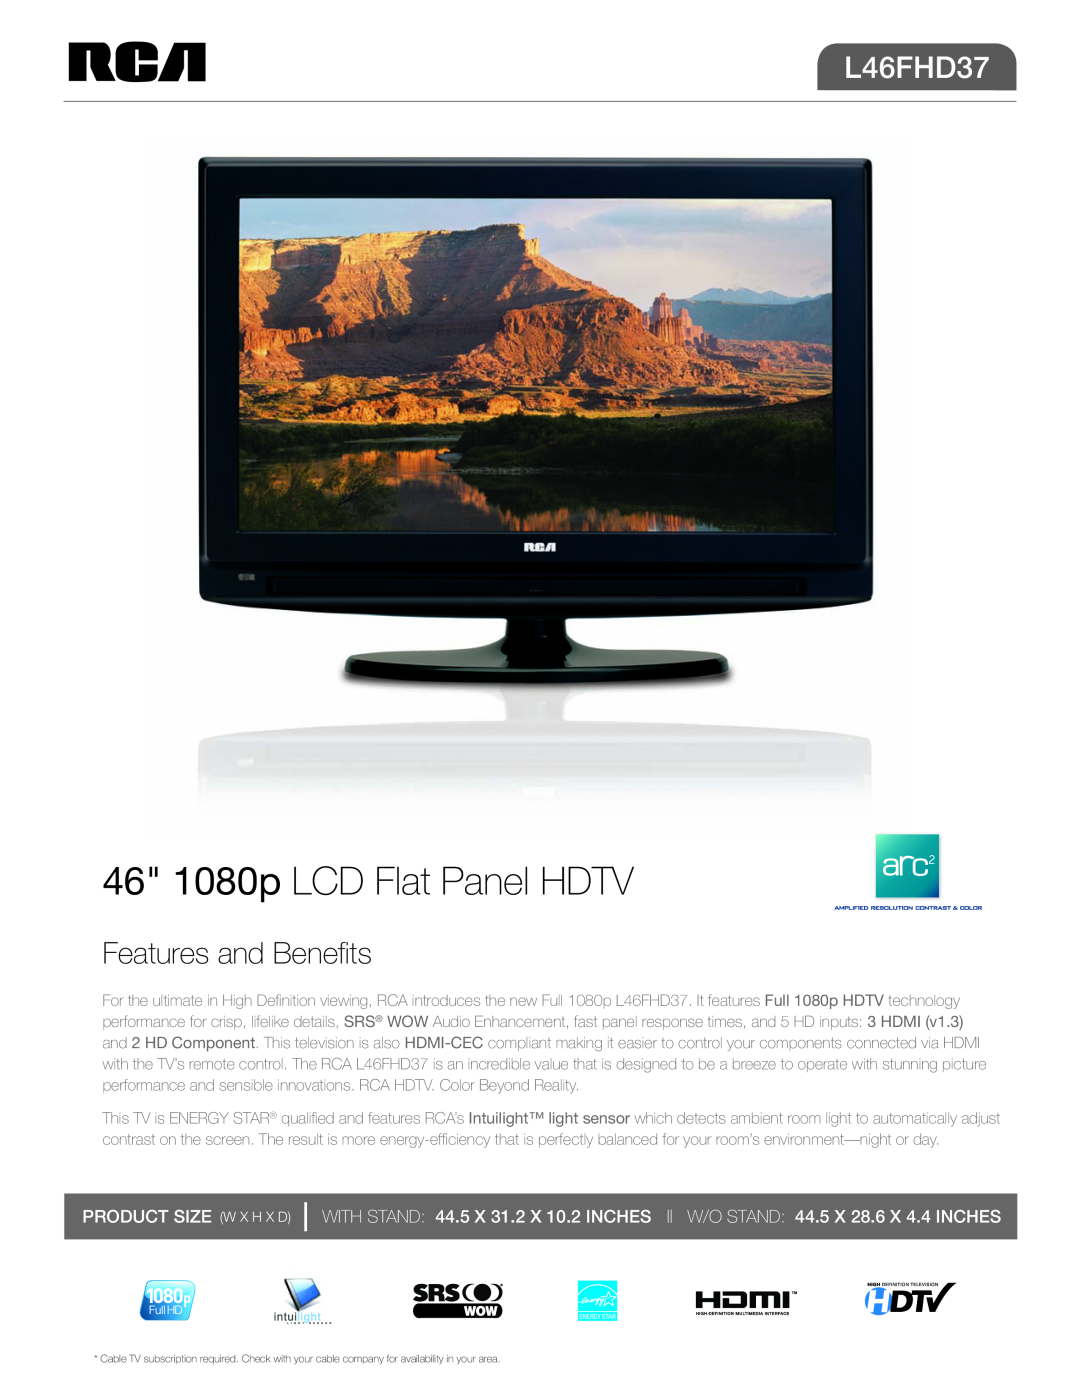 RCA L46FHD37 manual 46 1080p LCD Flat Panel HDTV, Features and Benefits, Product Size W x H x D 